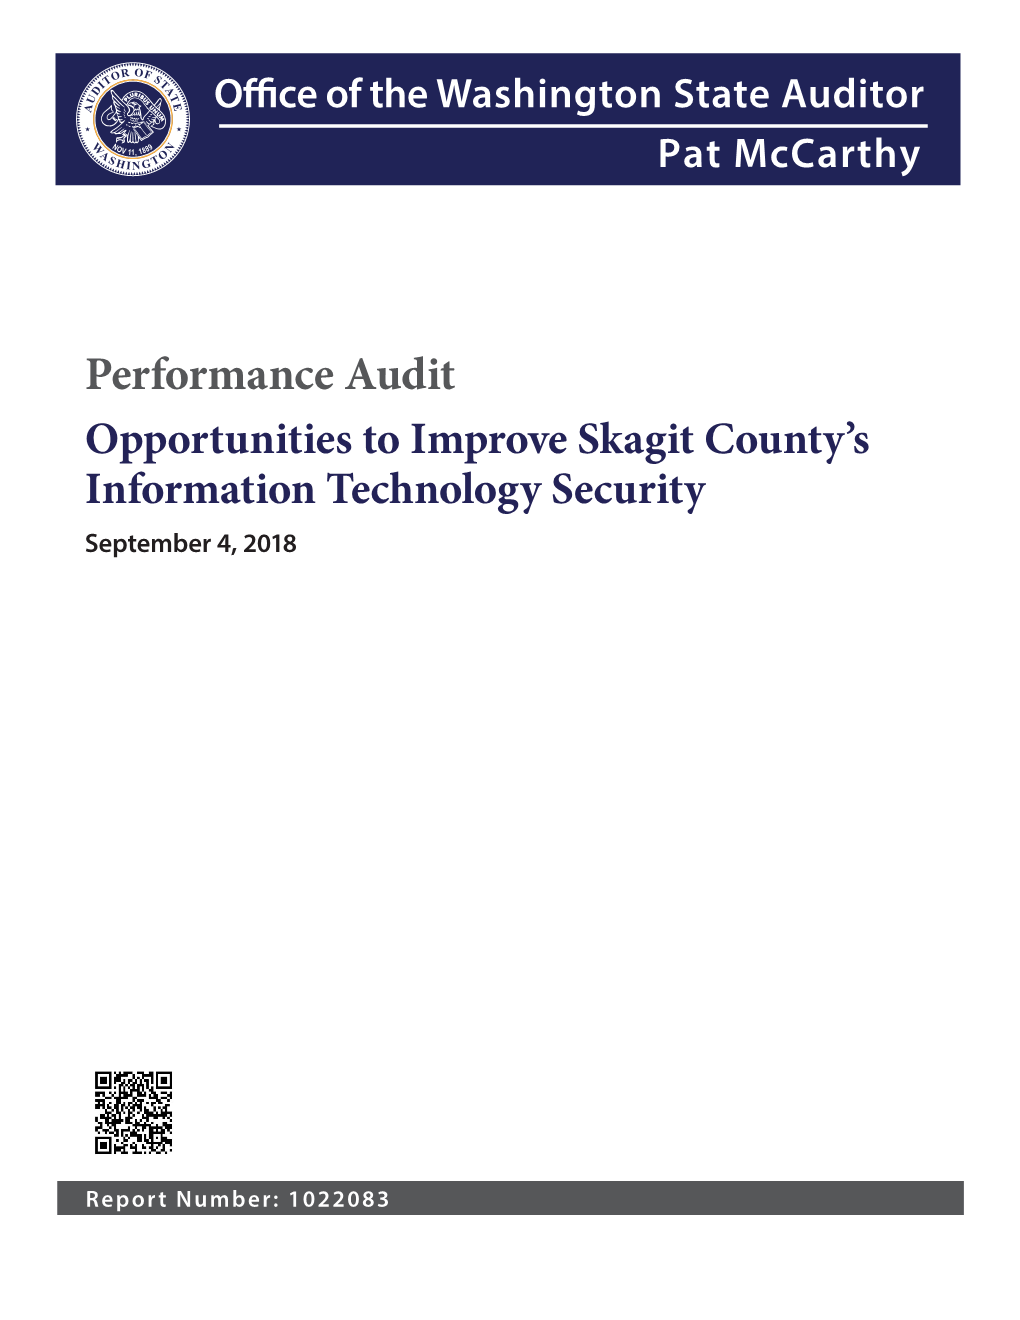 Performance Audit Opportunities to Improve Skagit County’S Information Technology Security September 4, 2018